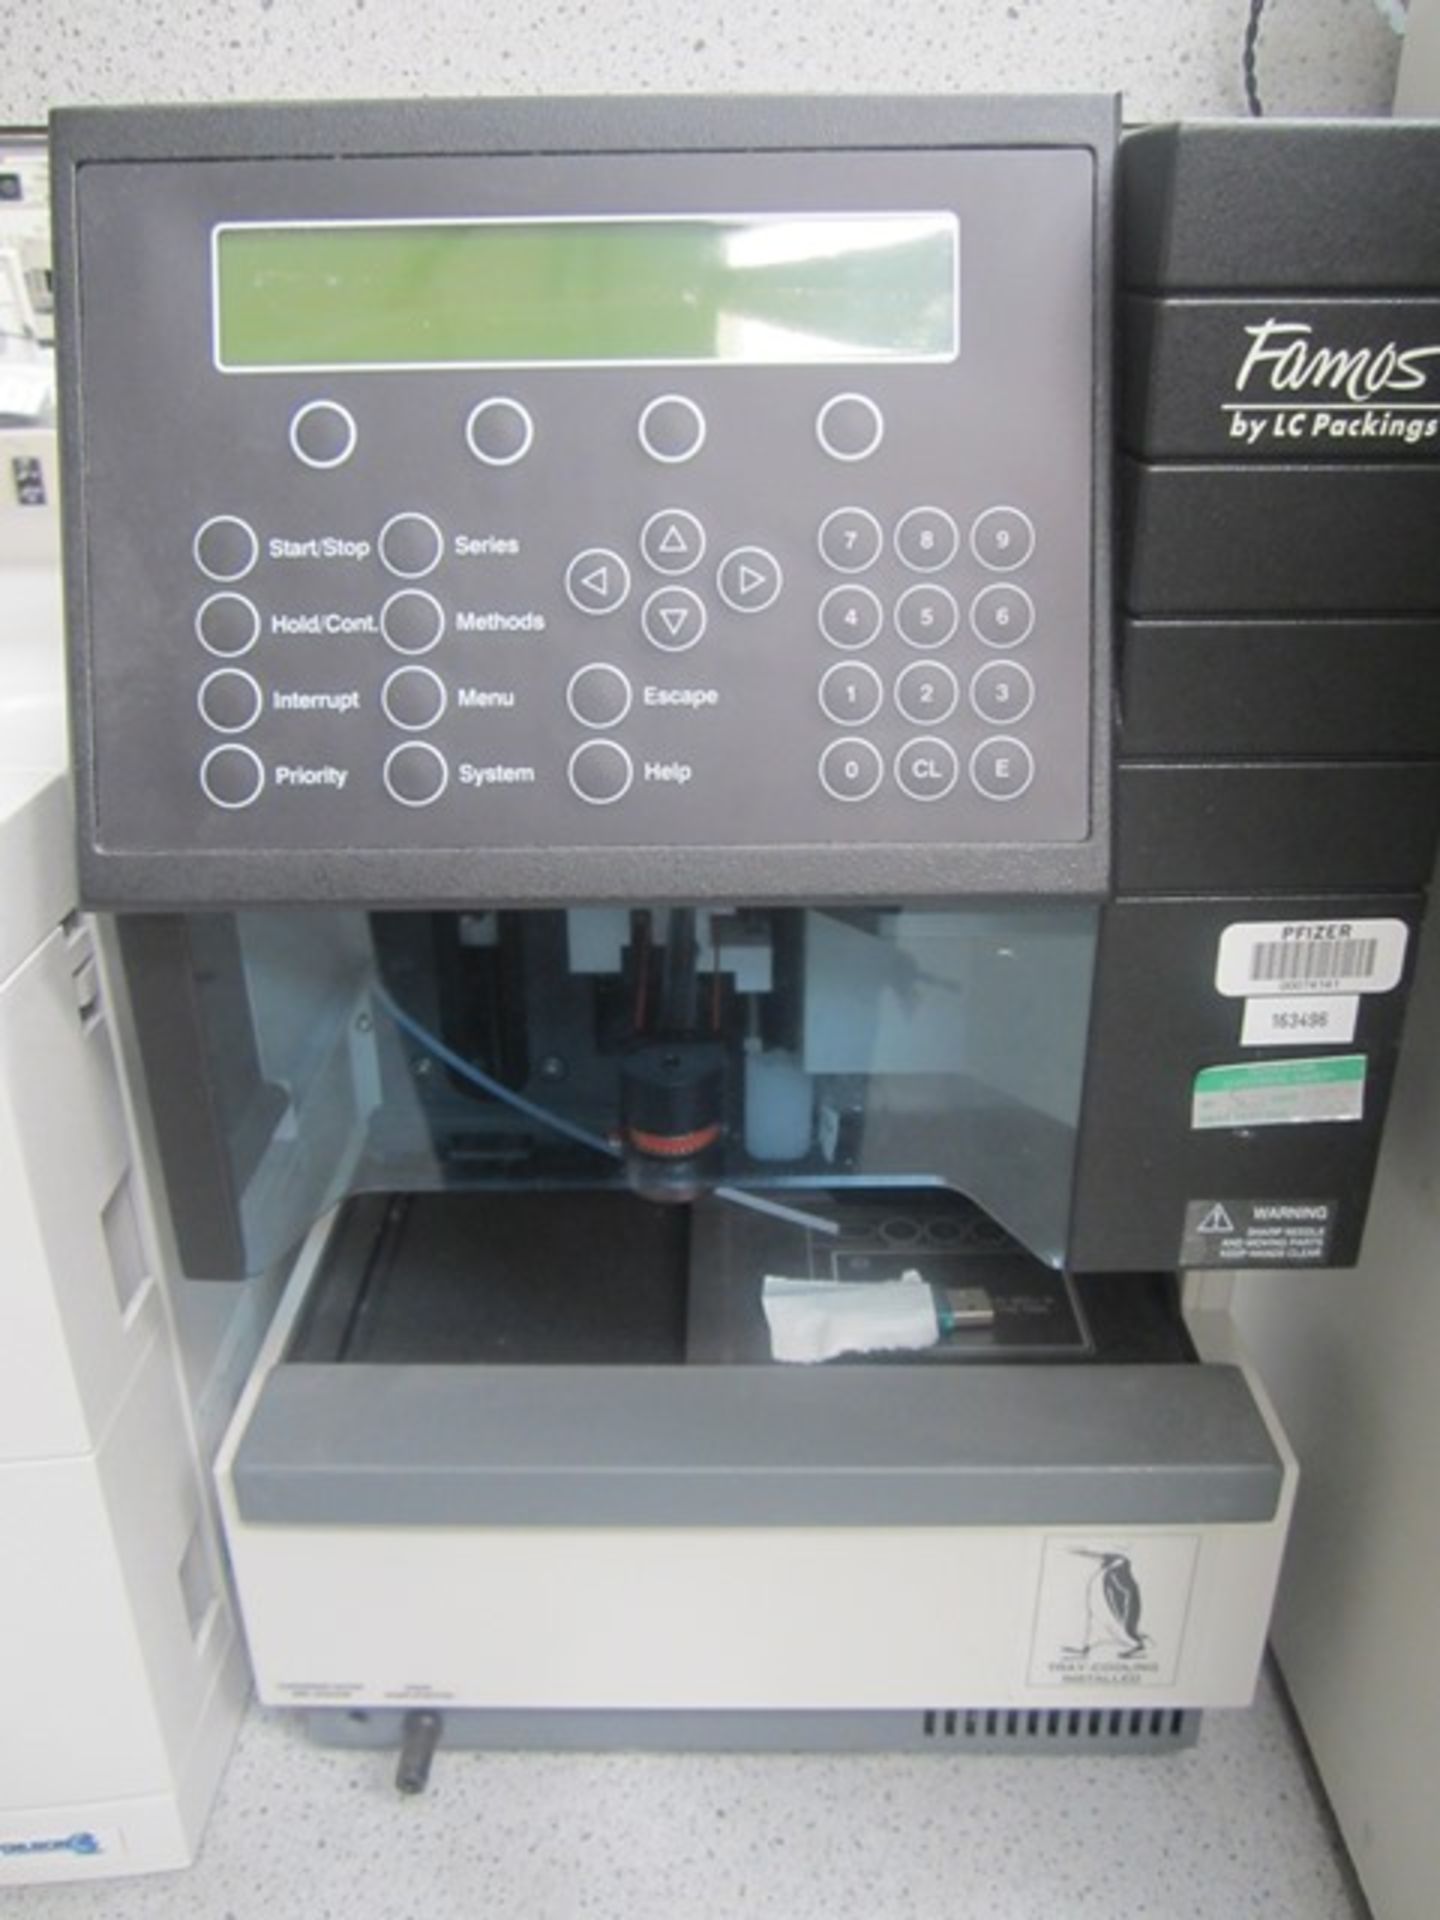 Dionex LC Packing Famos autosampler and Switchos with power leads